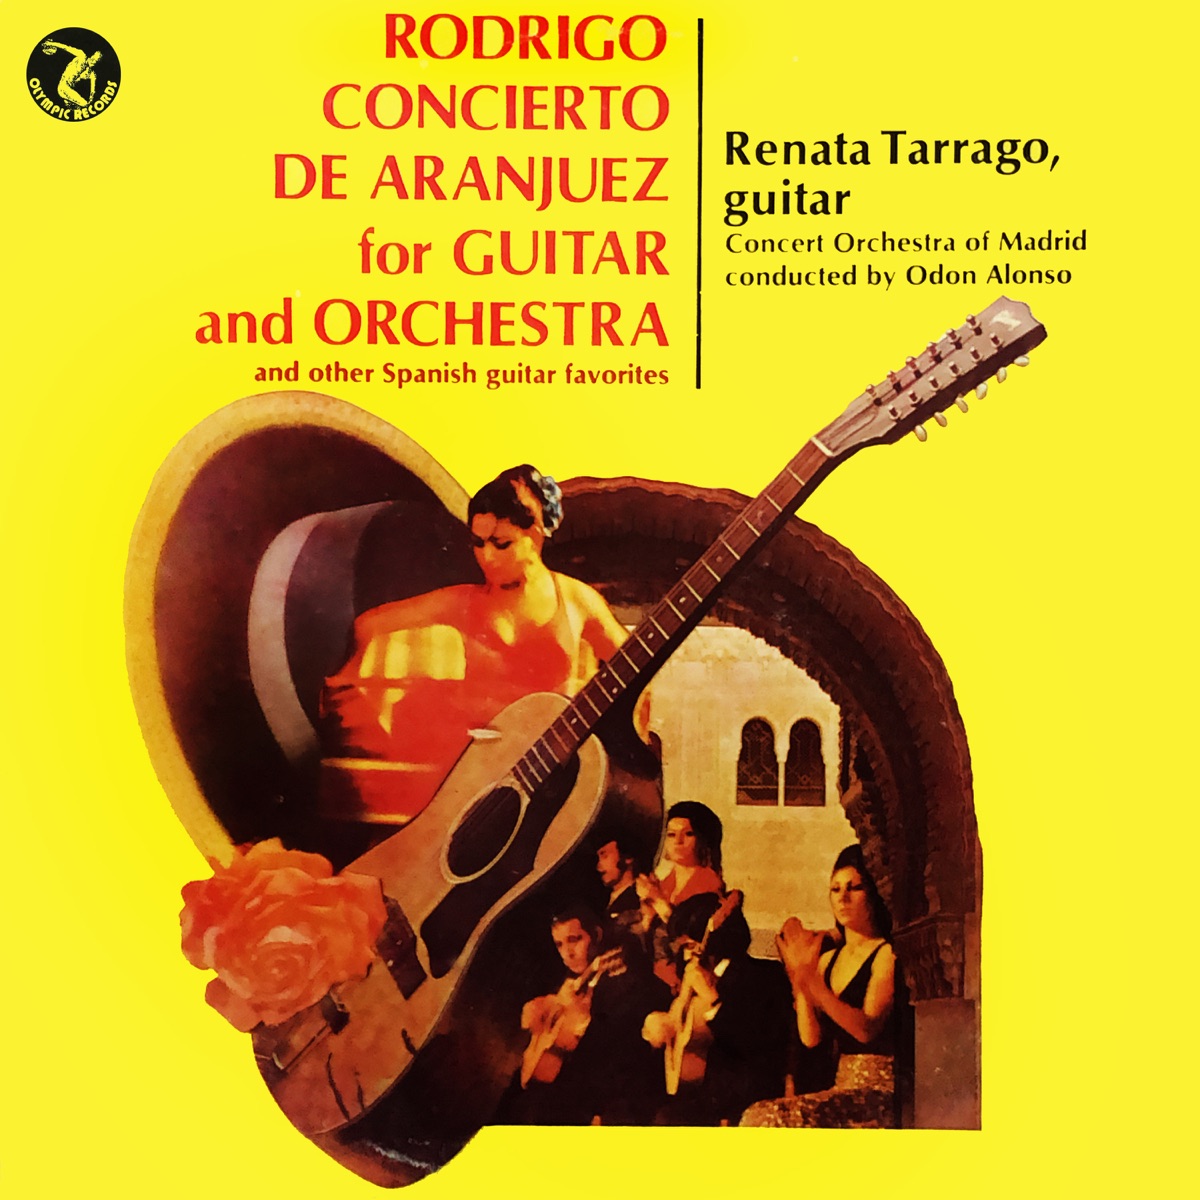 Concierto De Aranjuez For Guitar And Orchestra And Other Spanish Guitar  Favorites by Renata Tarrago, Concert Orchesta Of Madrid & Odón Alonso on  Apple Music